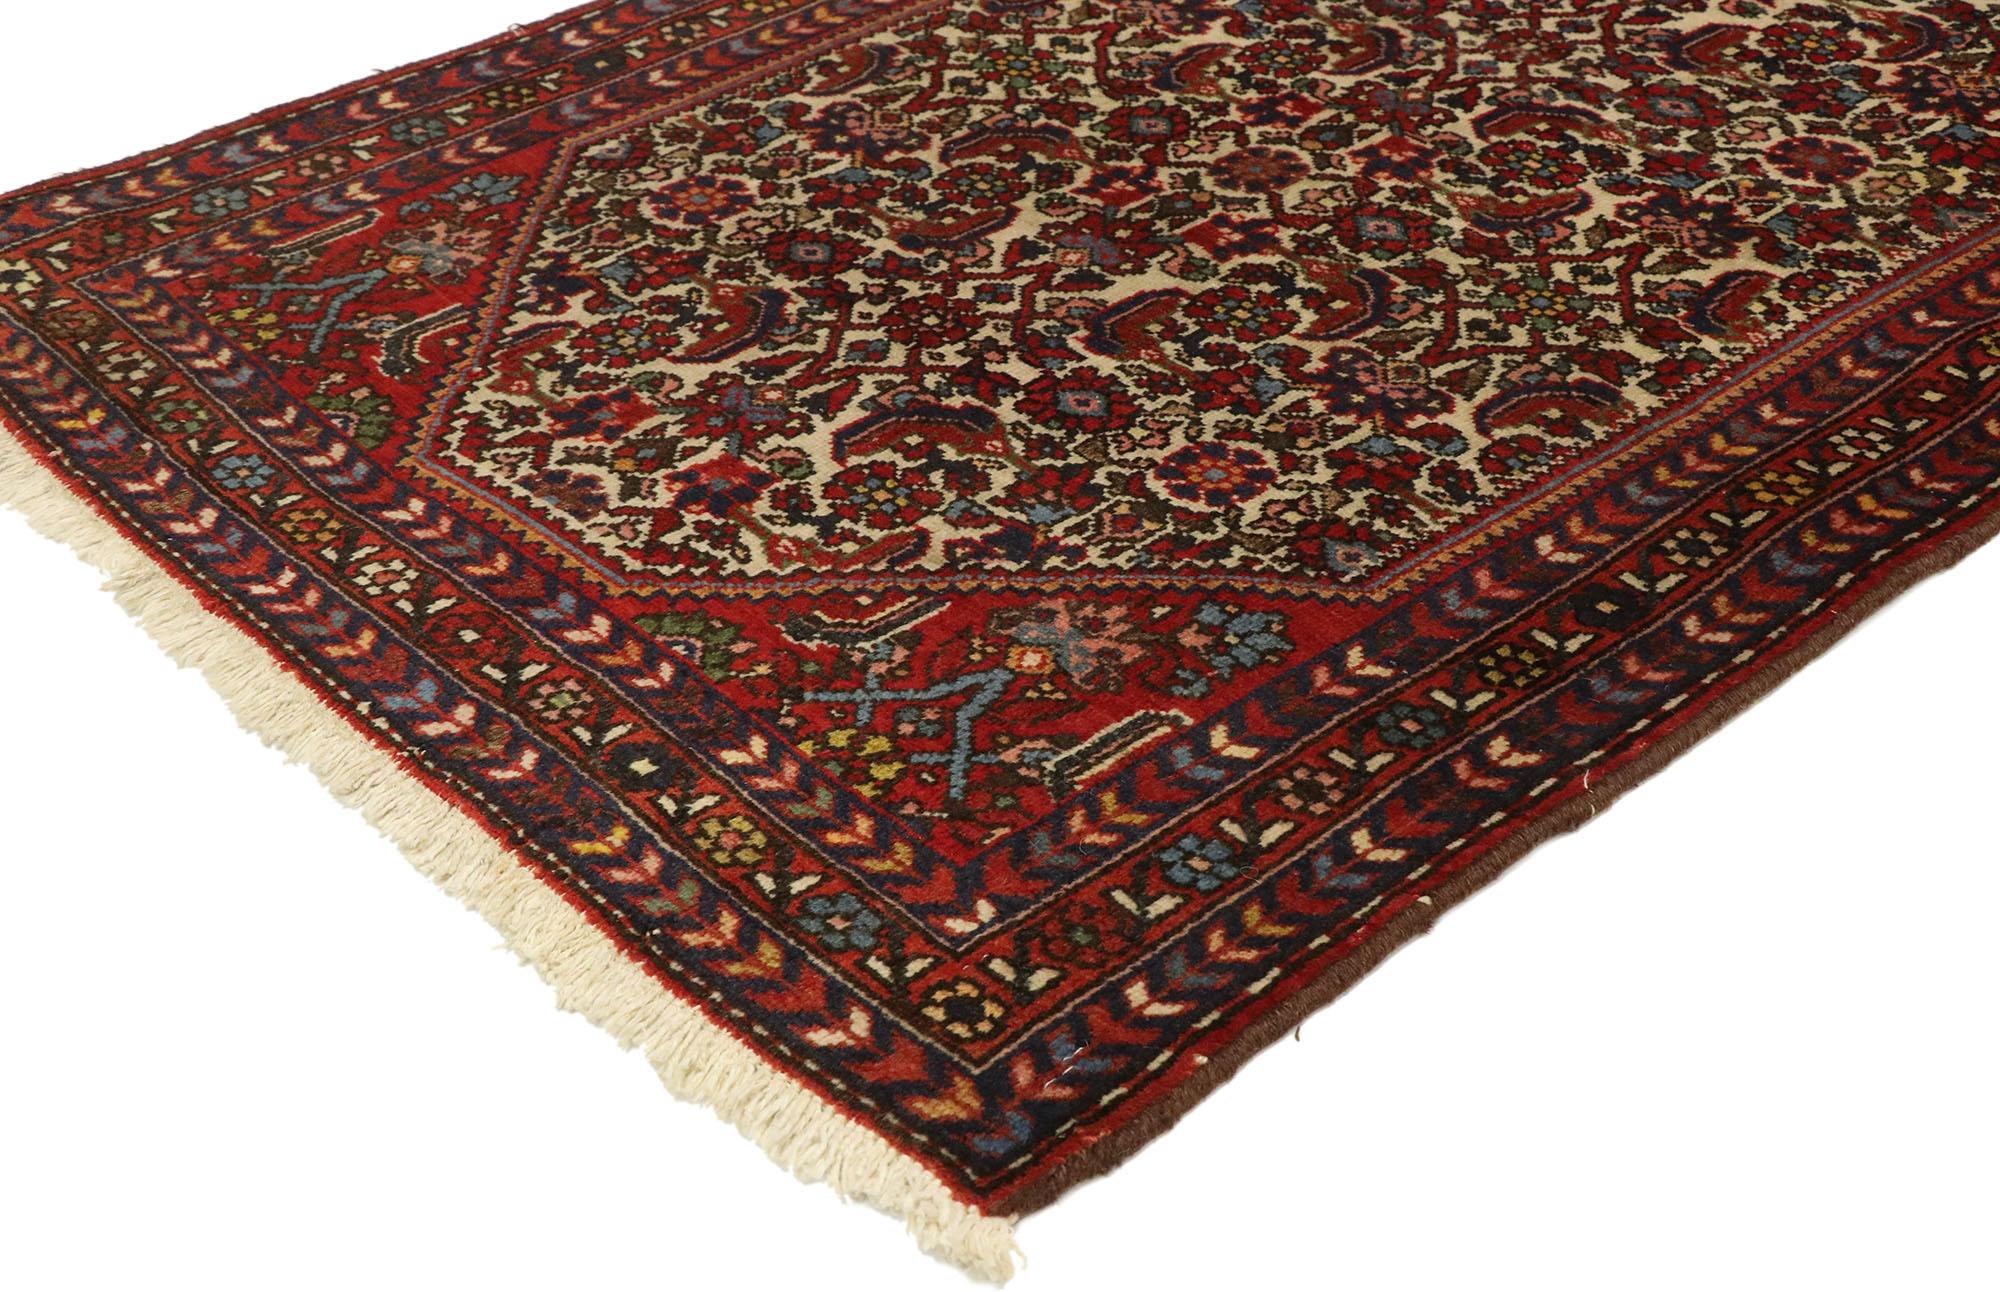 74266, vintage Persian Hamadan scatter rug with Traditional English style. With timeless elegance and nostalgic charm, this hand knotted wool vintage Persian Hamadan scatter rug can beautifully blend modern, contemporary and traditional interiors.